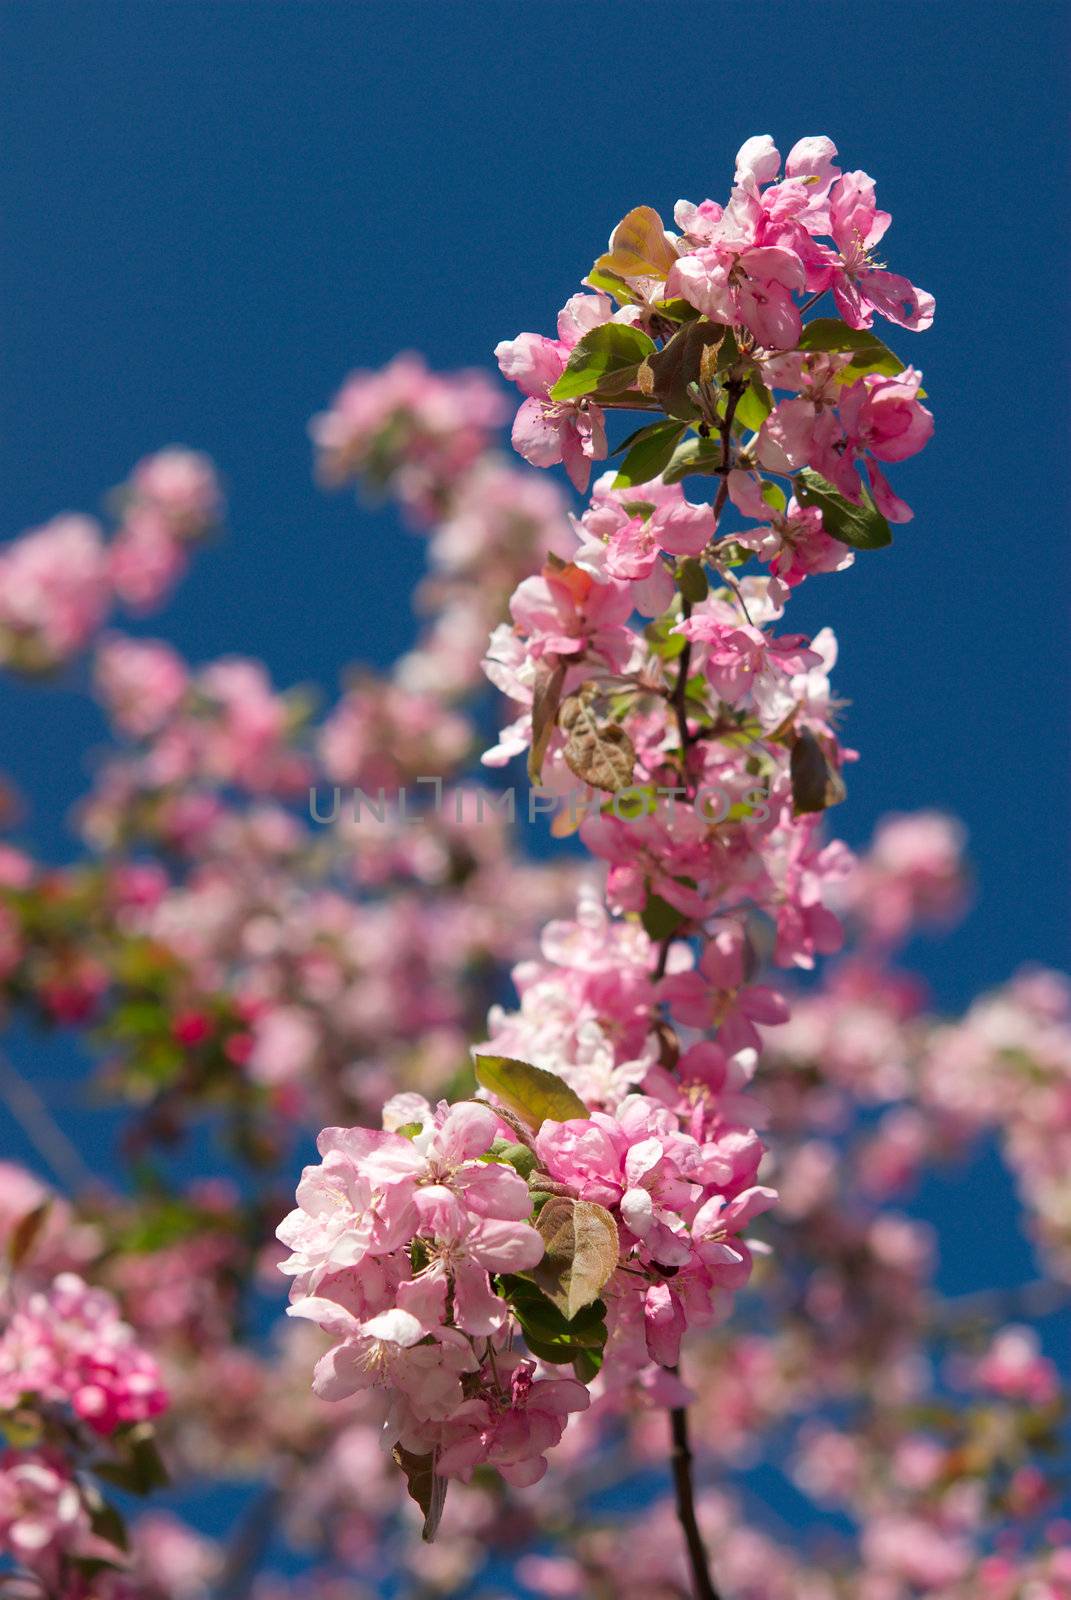 Pink apple blossoms against a deep blue sky